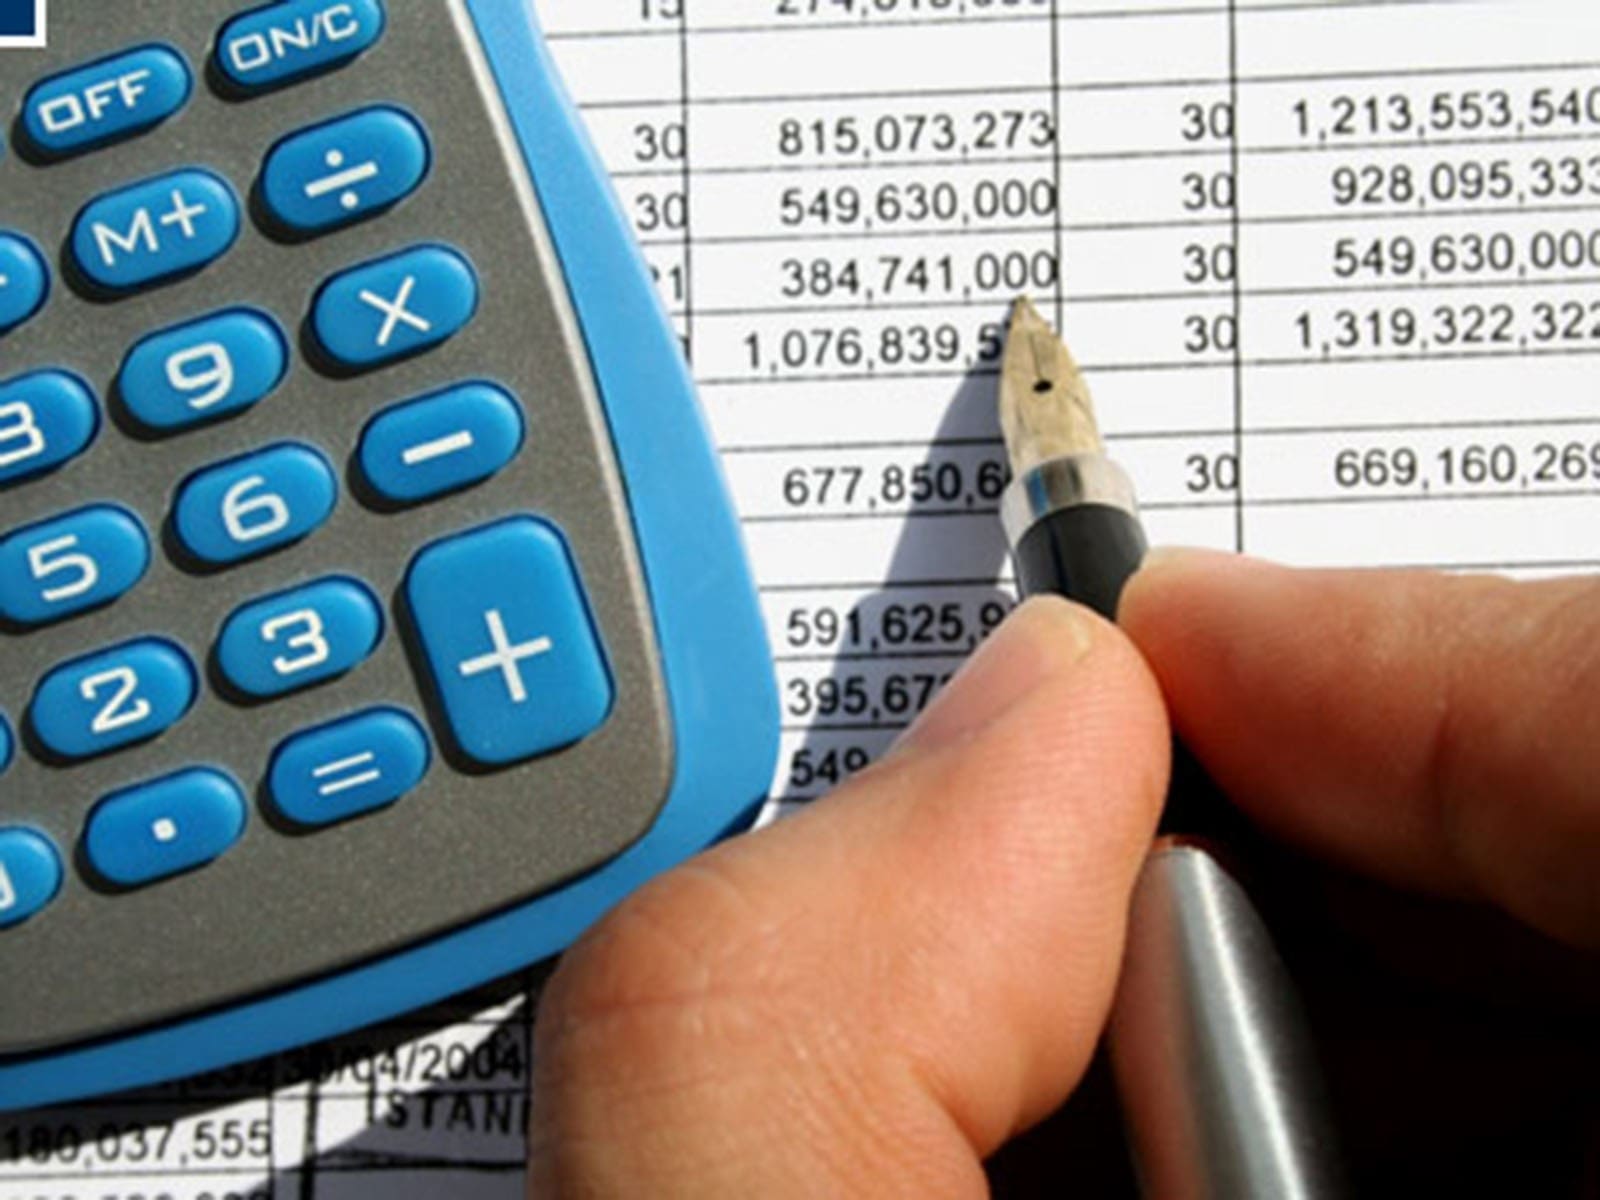 Five Things Every CPA Should Look For When Outsourcing Bookkeeping Services